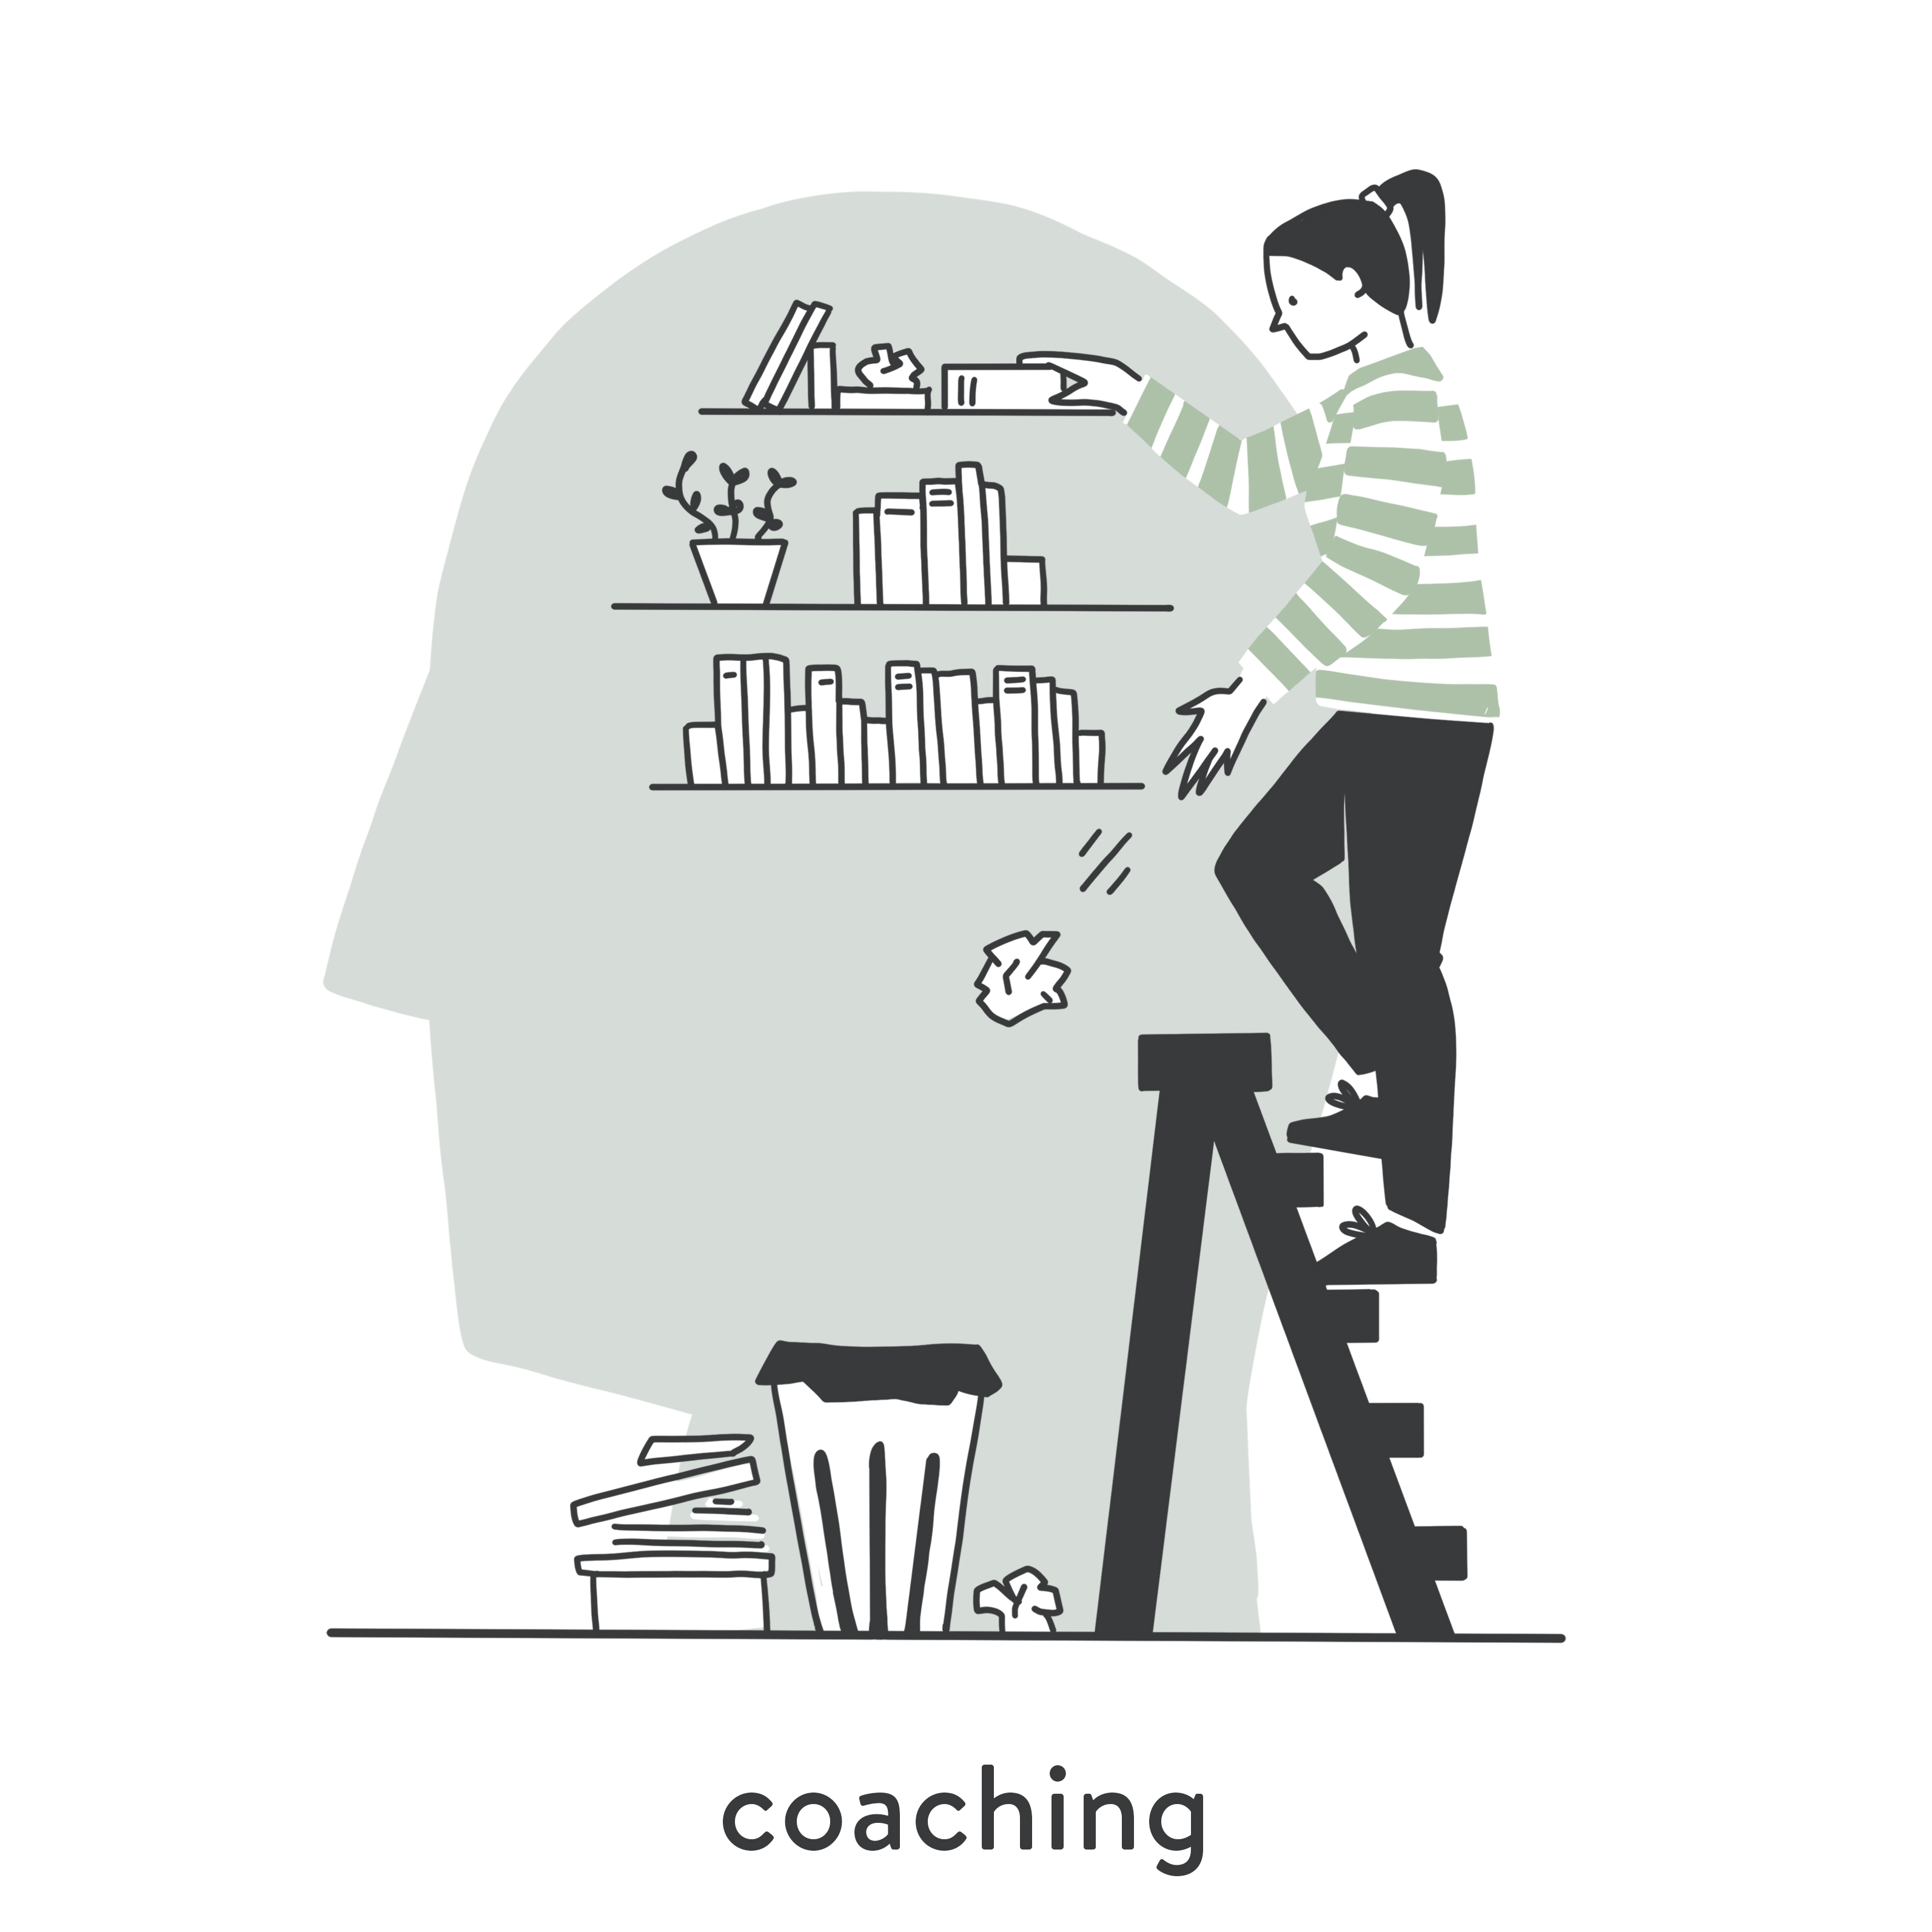 anderes coaching. consulting. leadership